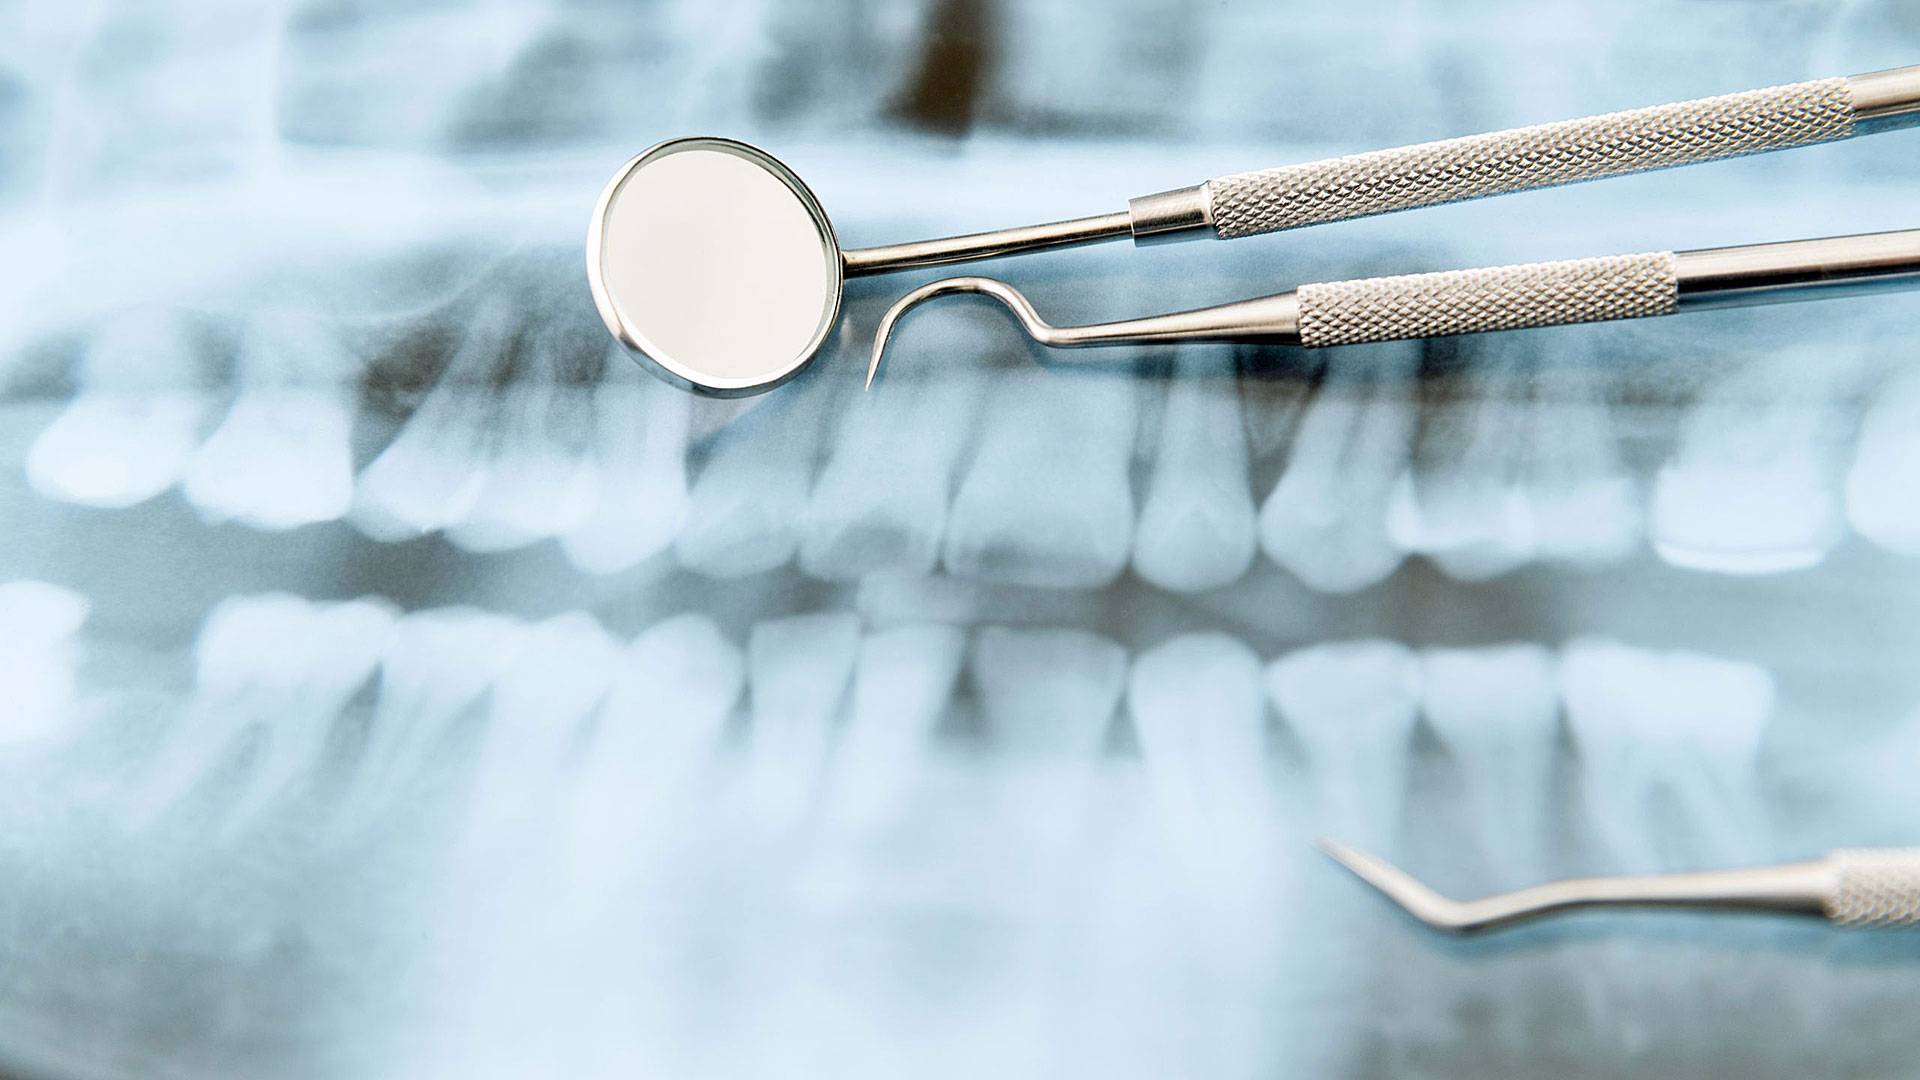 Can Dental X-rays Cause Oral Cancer?